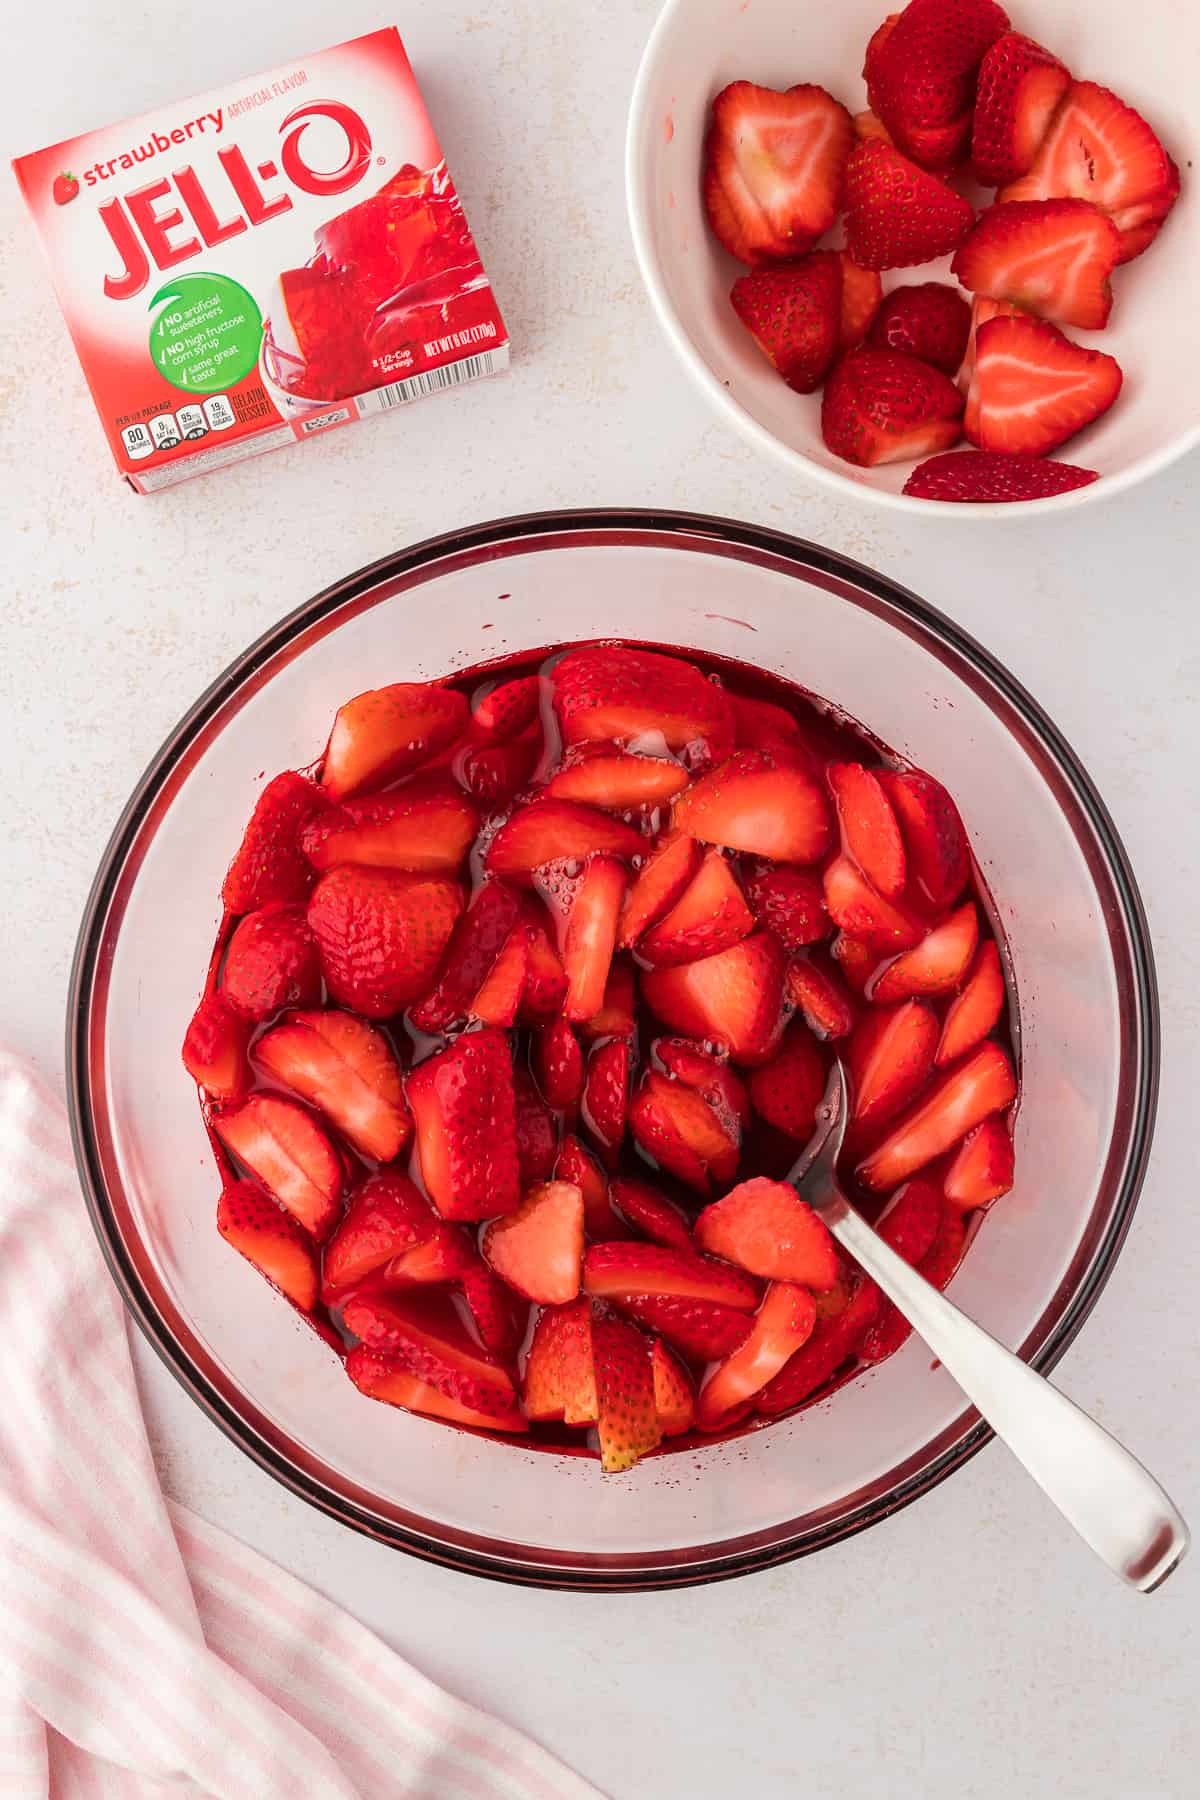 a glass bowl with the strawberry jello mixture in it for strawberry pretzel salad with a spoon in it, beside a small white bowl of fresh strawberries, a pink and white striped kitchen towel and a box of strawberry jello